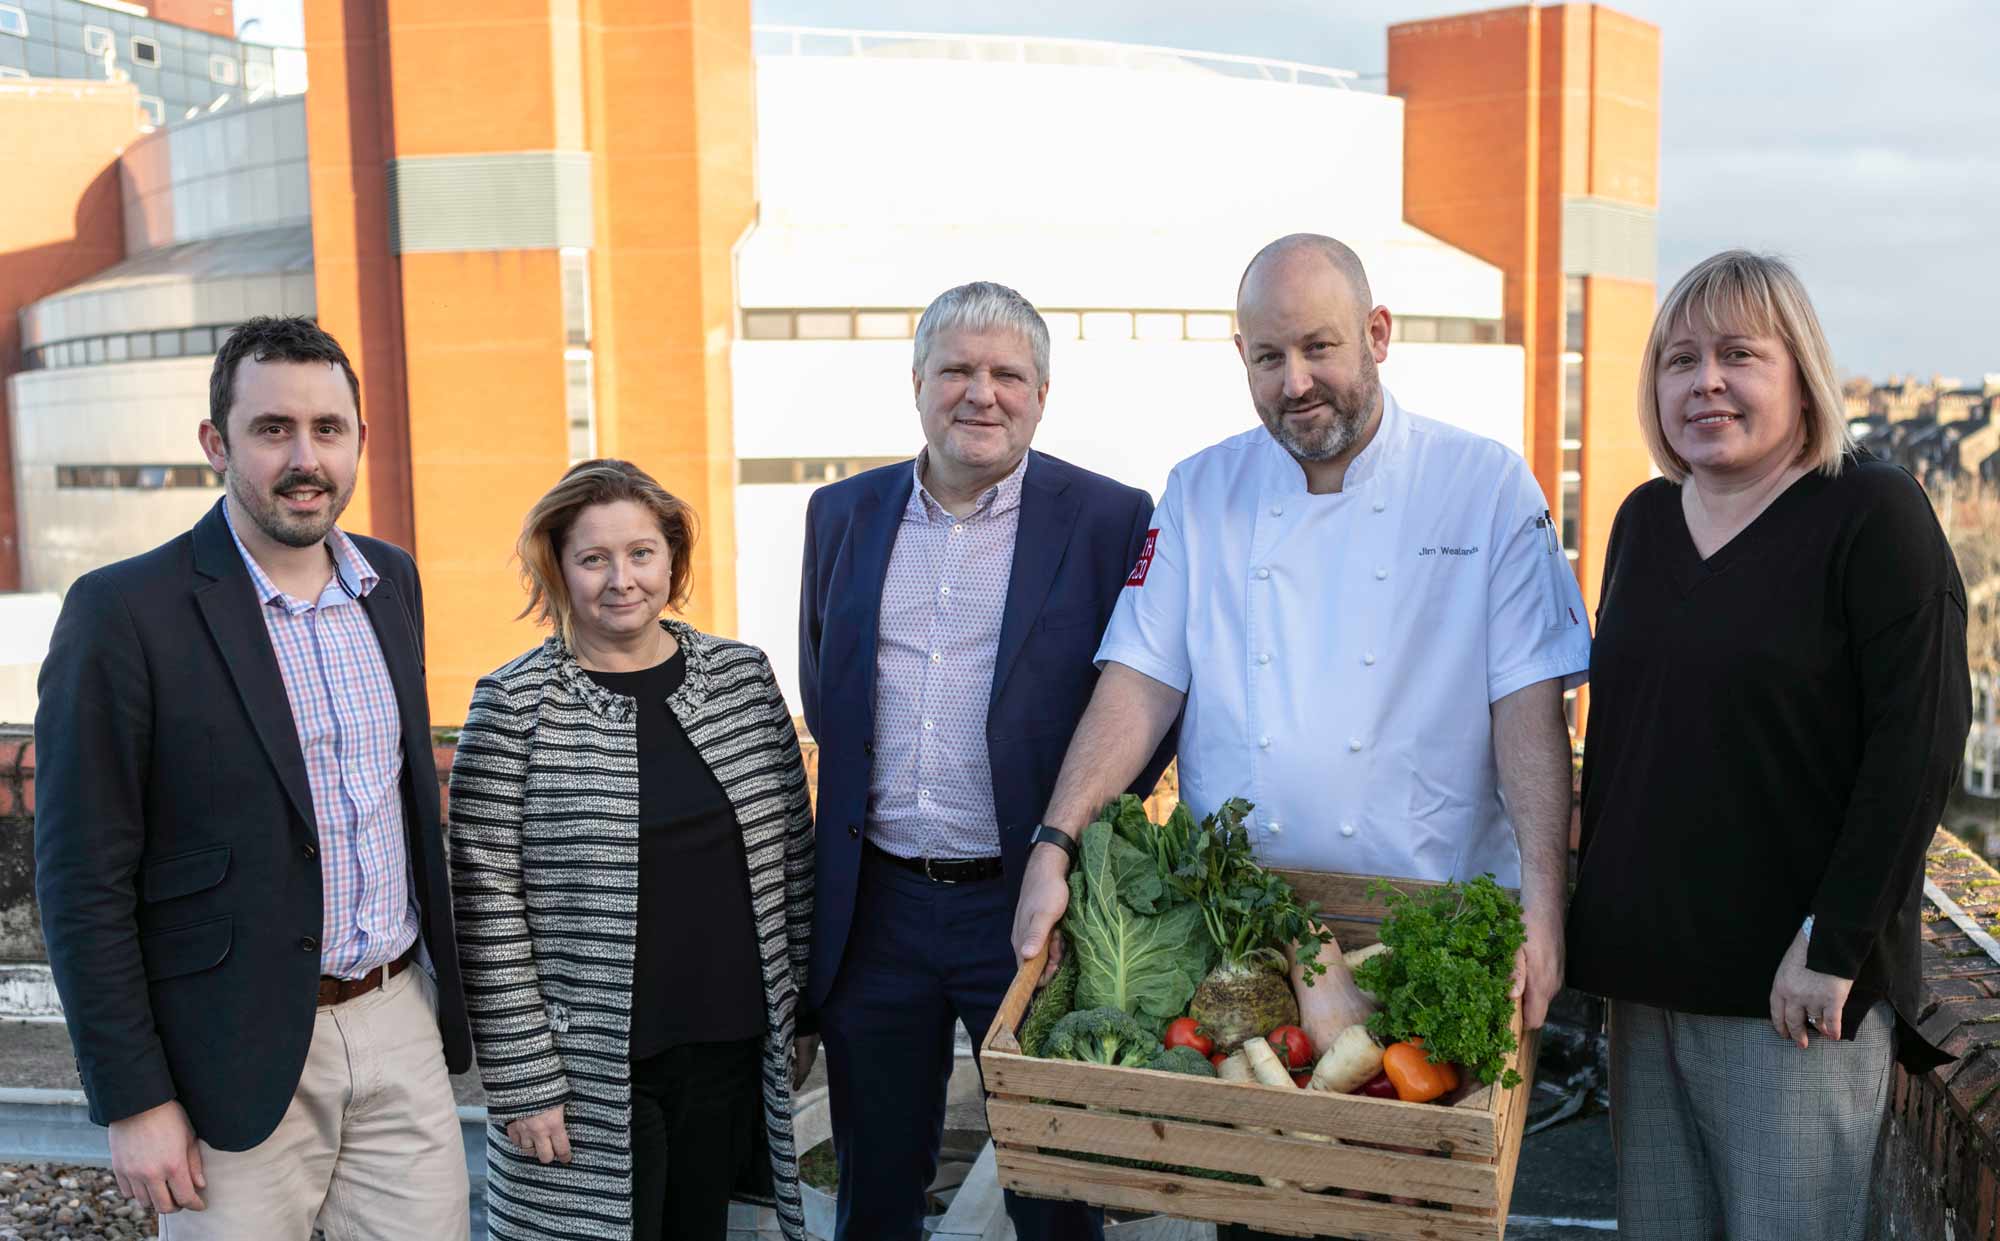 Tom Lloyd, CH&CO Commercial Operations Manager, North; Dawn Milne, CH&CO Head of Project Management Office; Simon Kent, Director of Harrogate Convention Centre; Jim Wealands, Group Food Development Director; Claire Trott, Commercial Manager at Harrogate Convention Centre